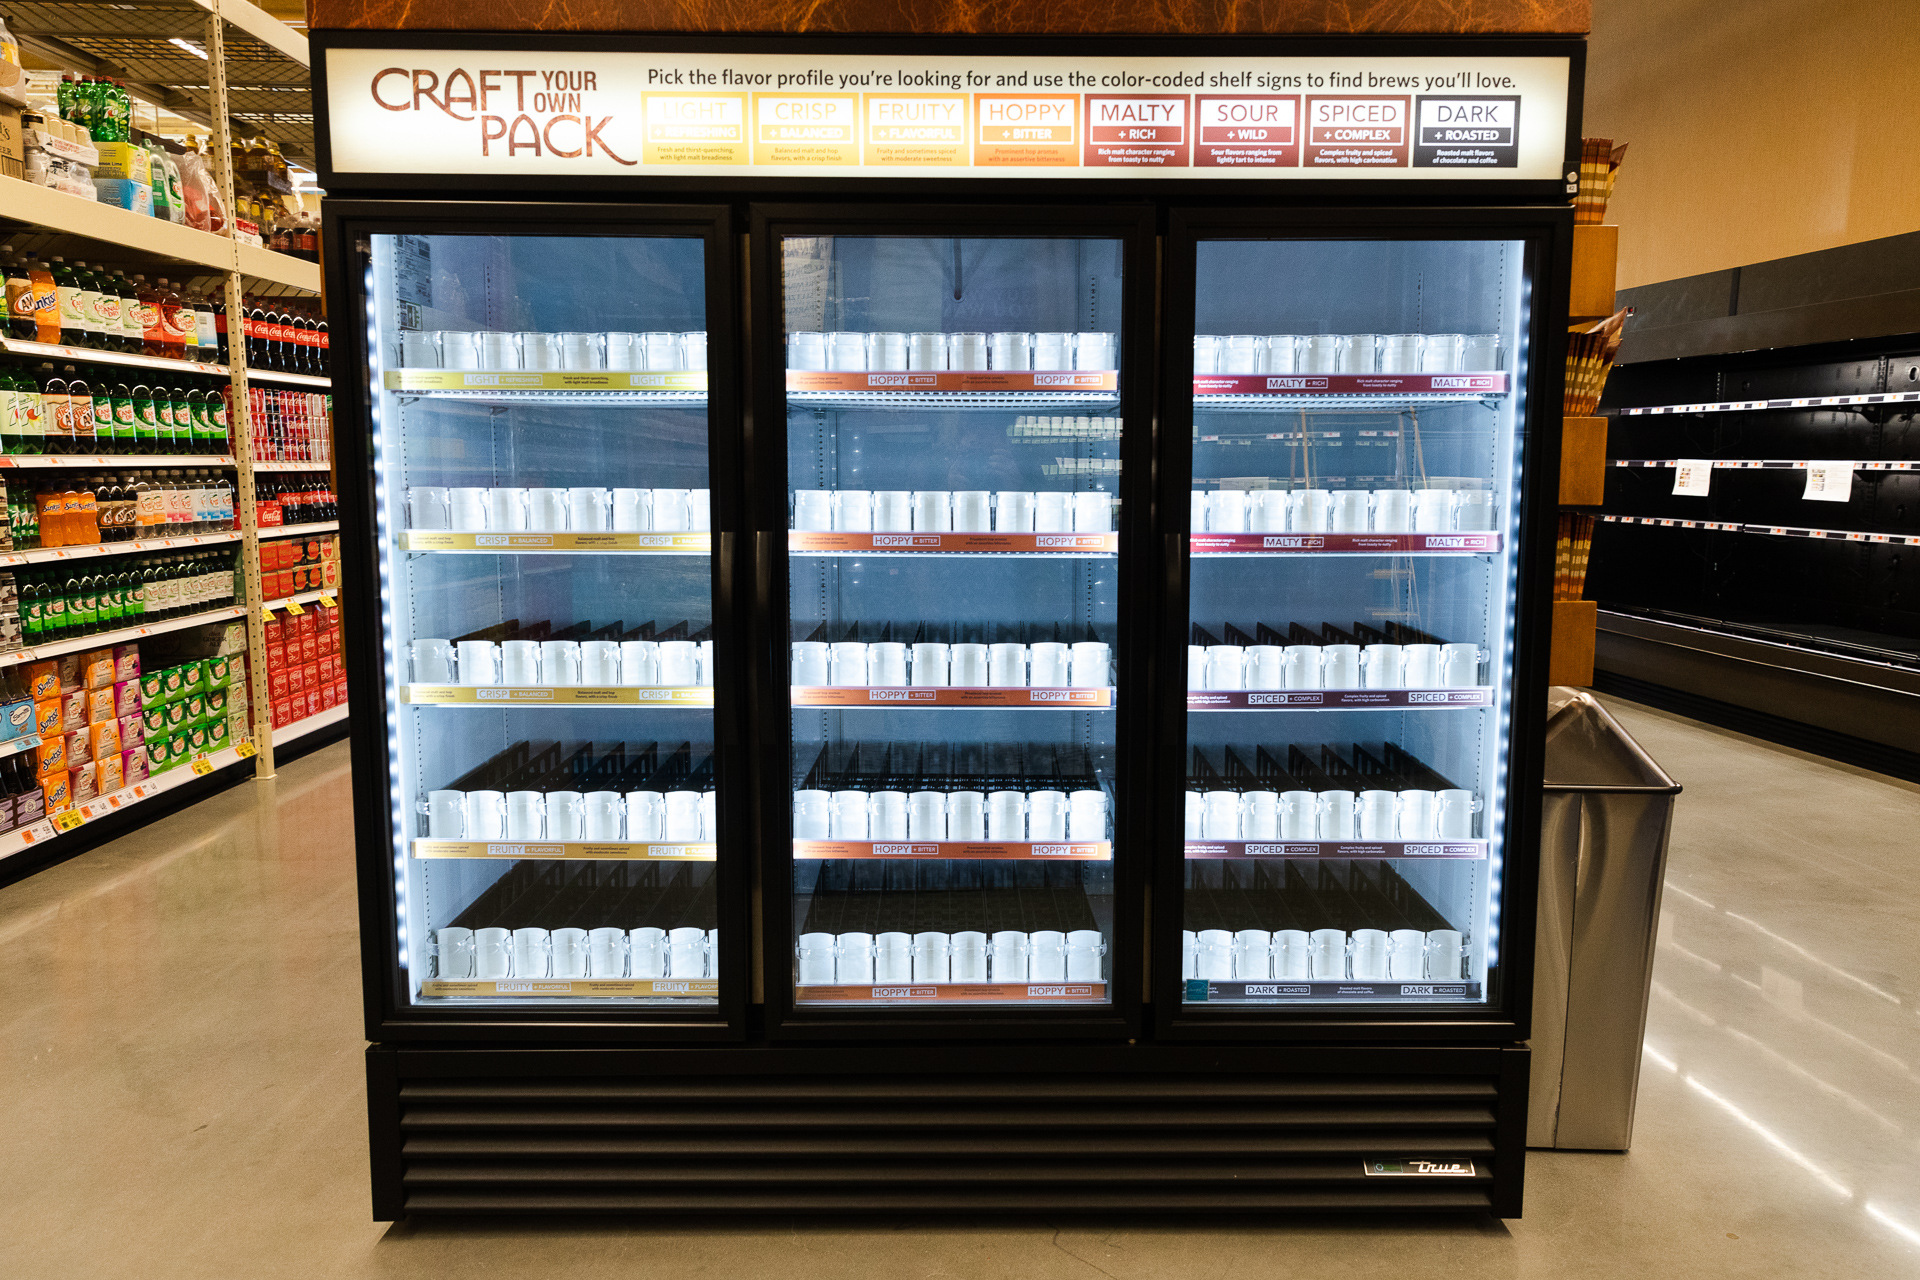 This refrigerated beverage display case will soon be filled with craft beer. Eagle photo by Paul Frangipane